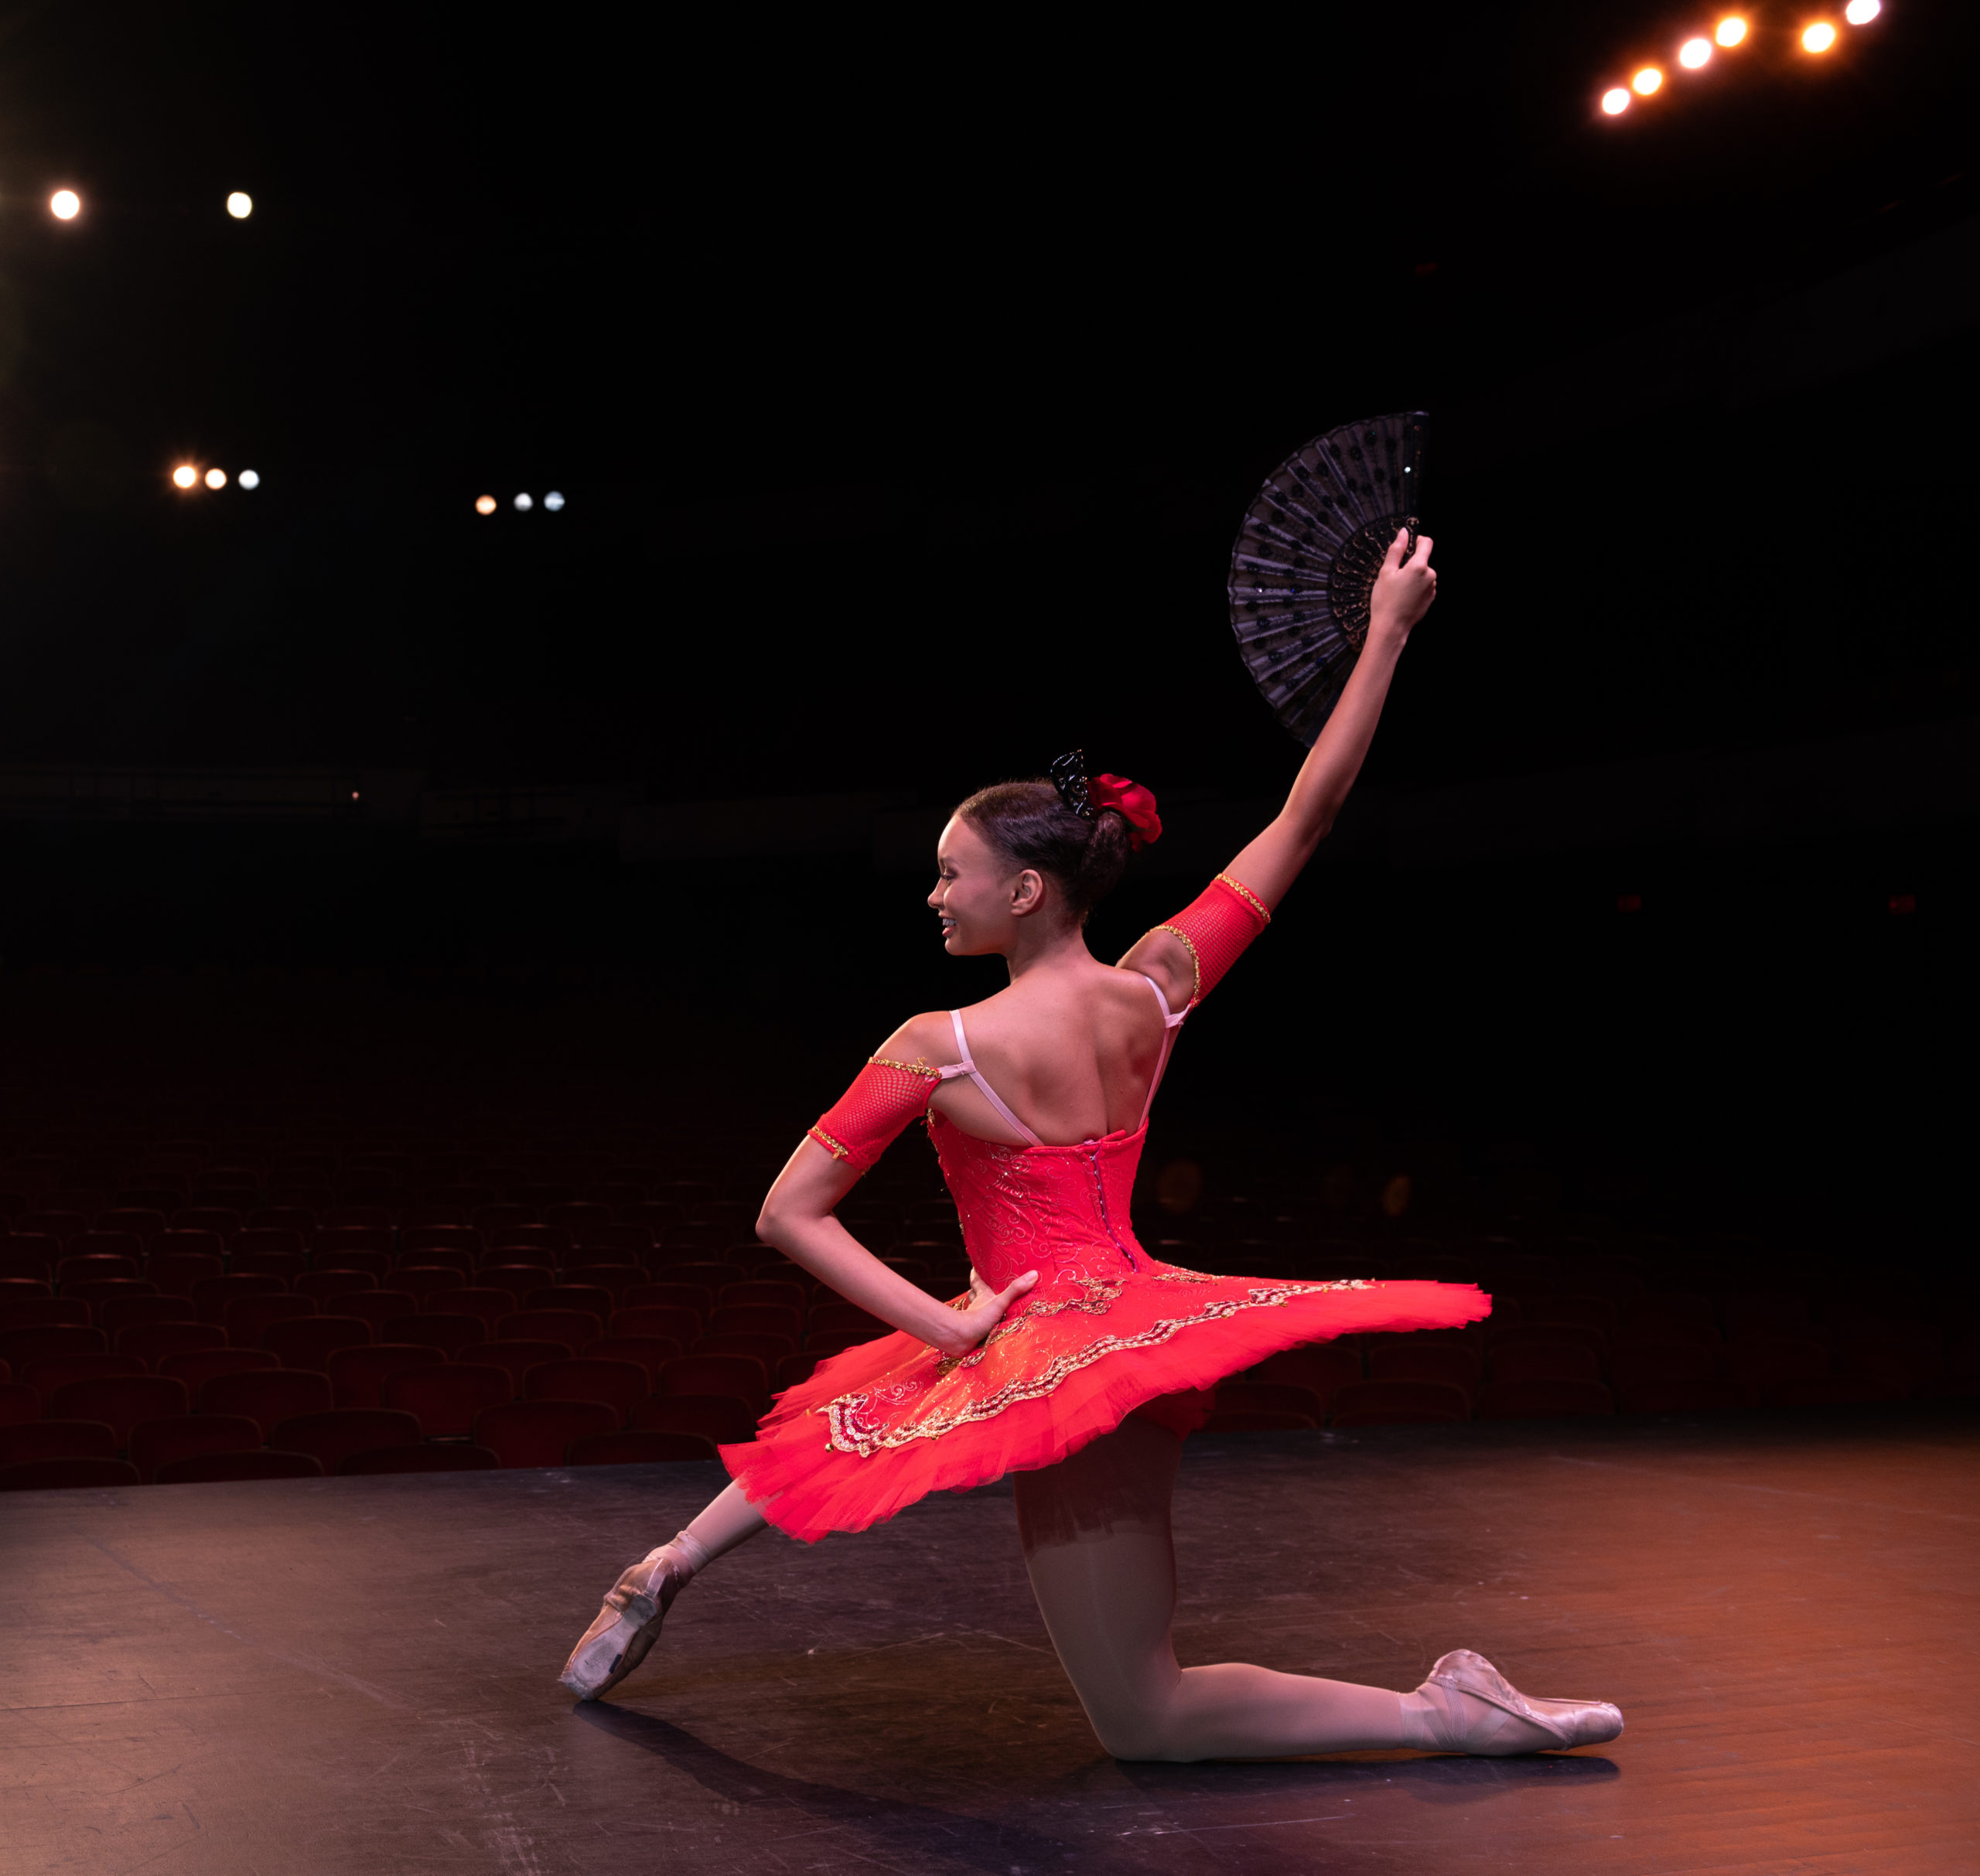 A teen female ballet dancer kneels onstage, while wearing pointe shoes and a red tutu and holding a fan. The bright theater lights illuminate her and the stage.